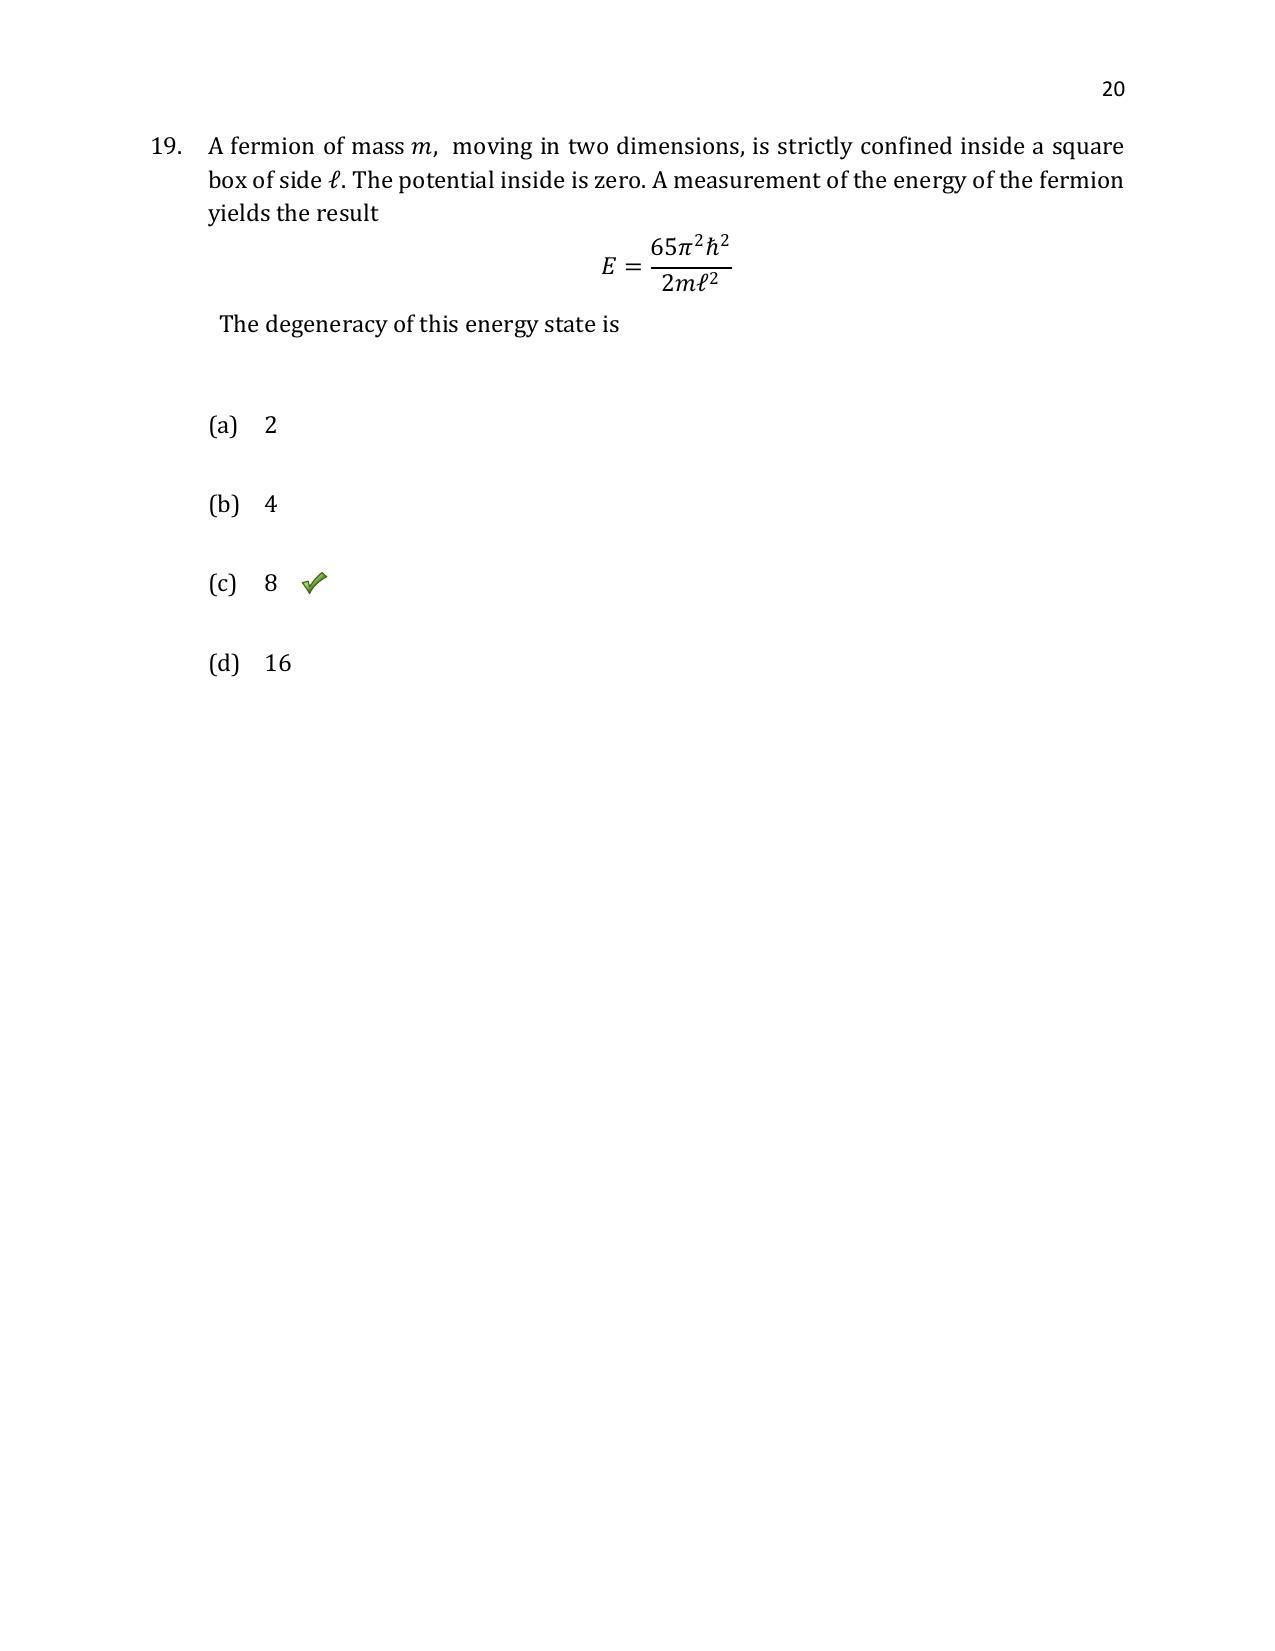 TIFR GS 2020 Physics Question Paper - Page 21